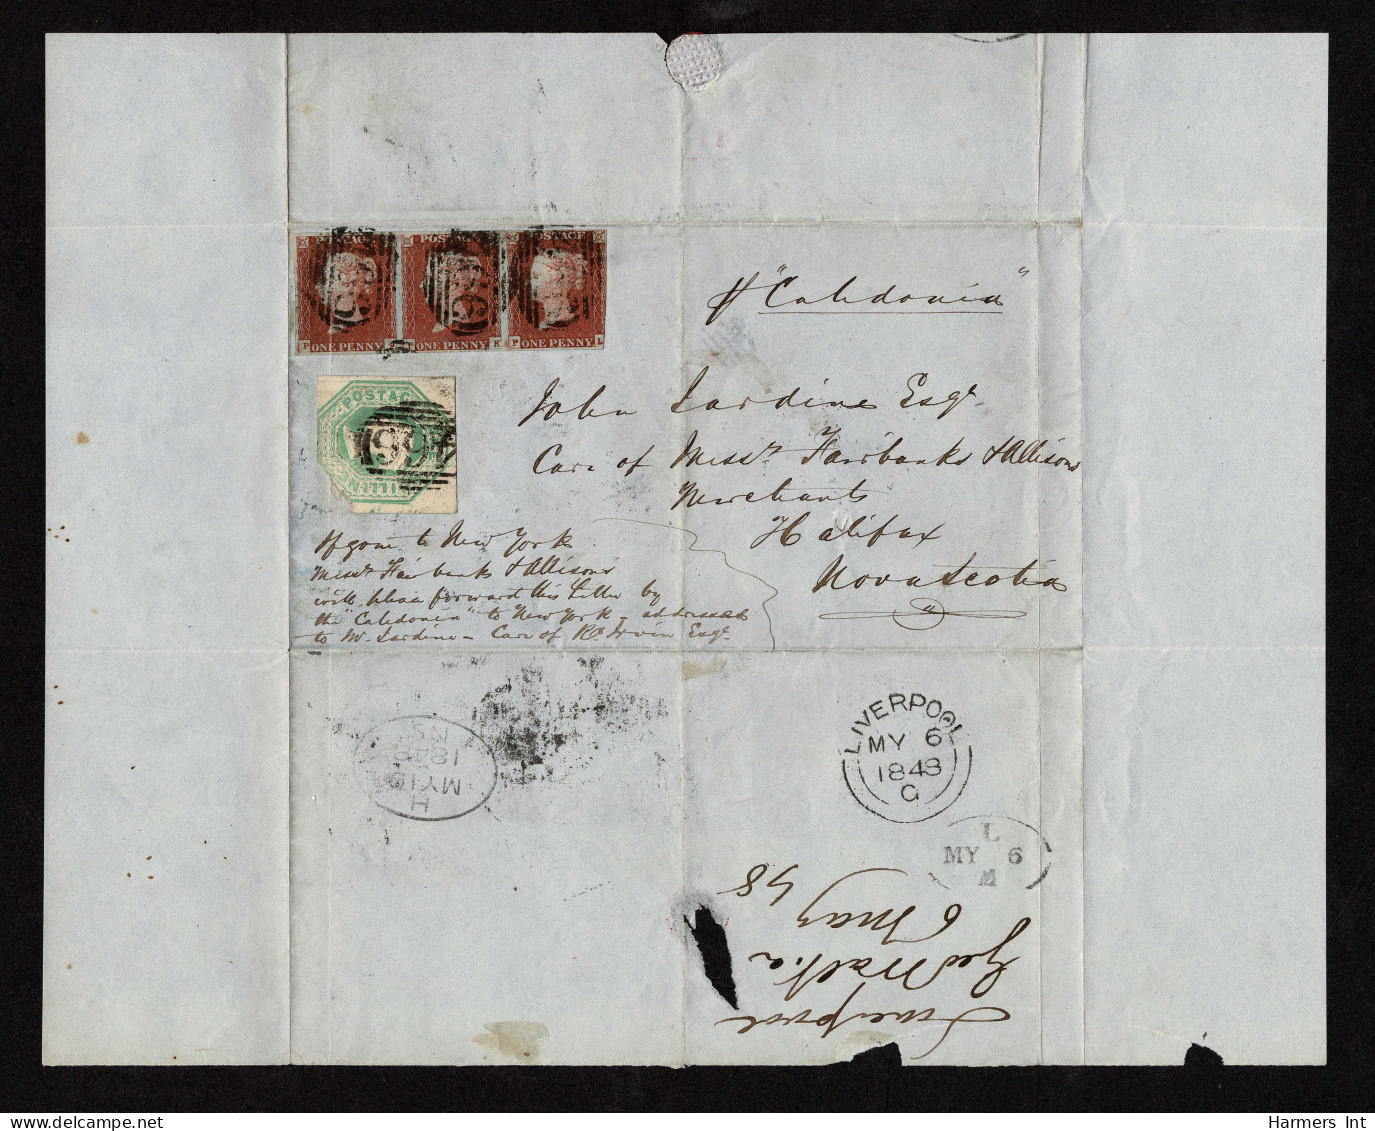 Lot # 613 Great Britain Covers 1847-54 Embossed; 1 shilling green EIGHT covers to the North America primarily United Sta